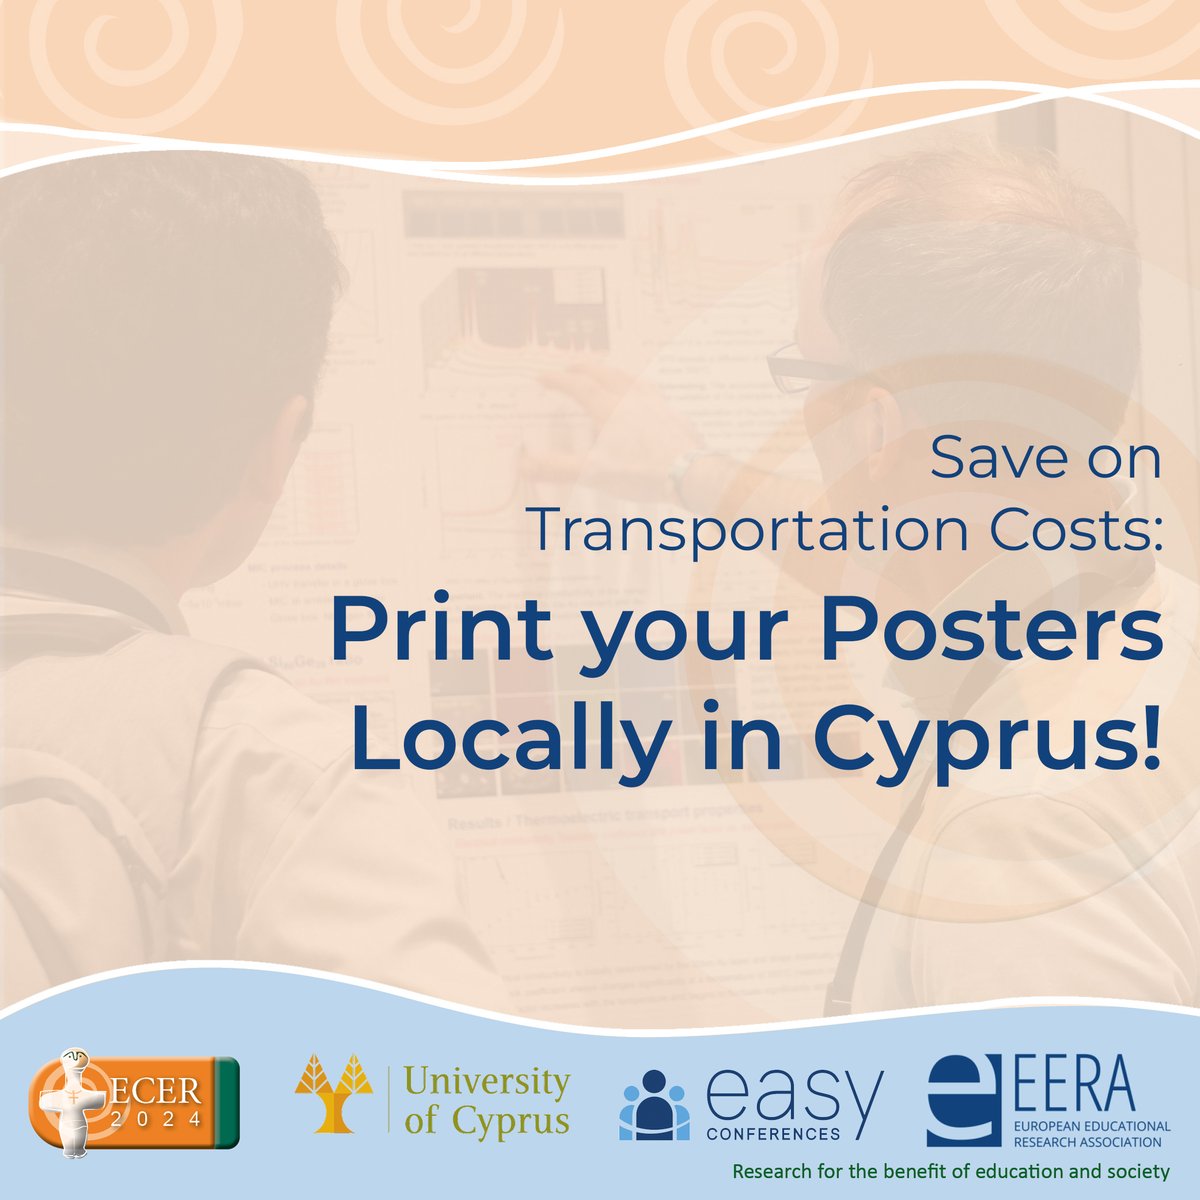 Save money and minimize the risk of damaging your poster by printing it locally in Cyprus! Visit easyconferences.org and navigate to the 'Conference Extras' section for more information. For further assistance, feel free to reach out to info@easyconferences.eu. #ECER2024